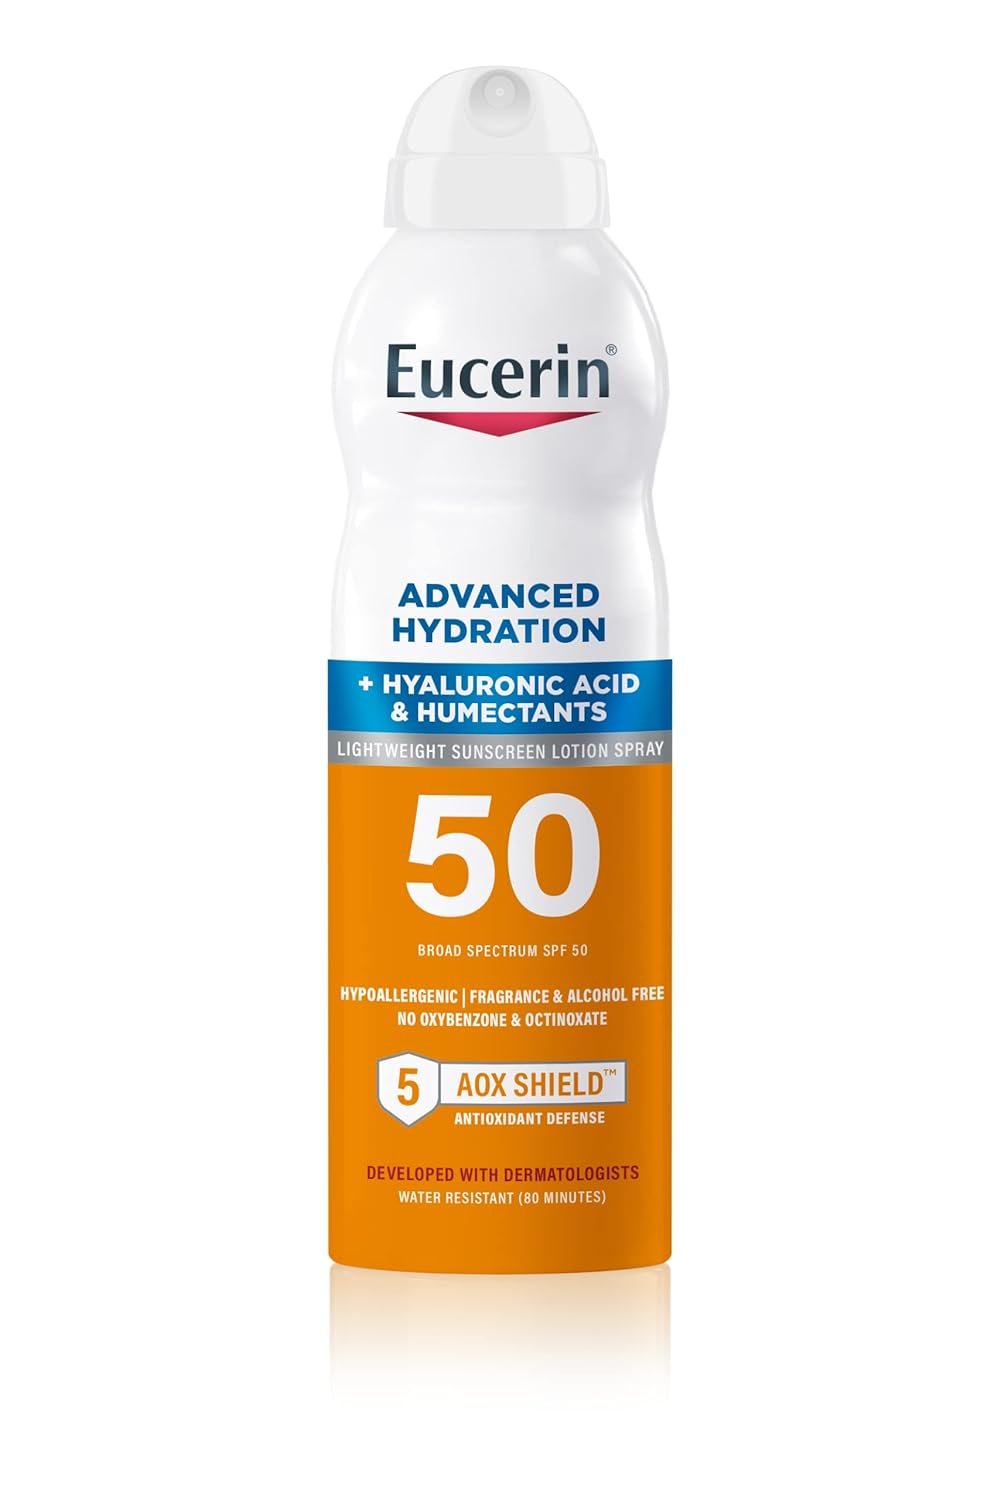 6-Oz Eucerin Advanced Hydration SPF 50 Lightweight Sunscreen Lotion Spray (Unscented) $5.49 w/ S&S + Free Shipping w/ Prime or on $35+